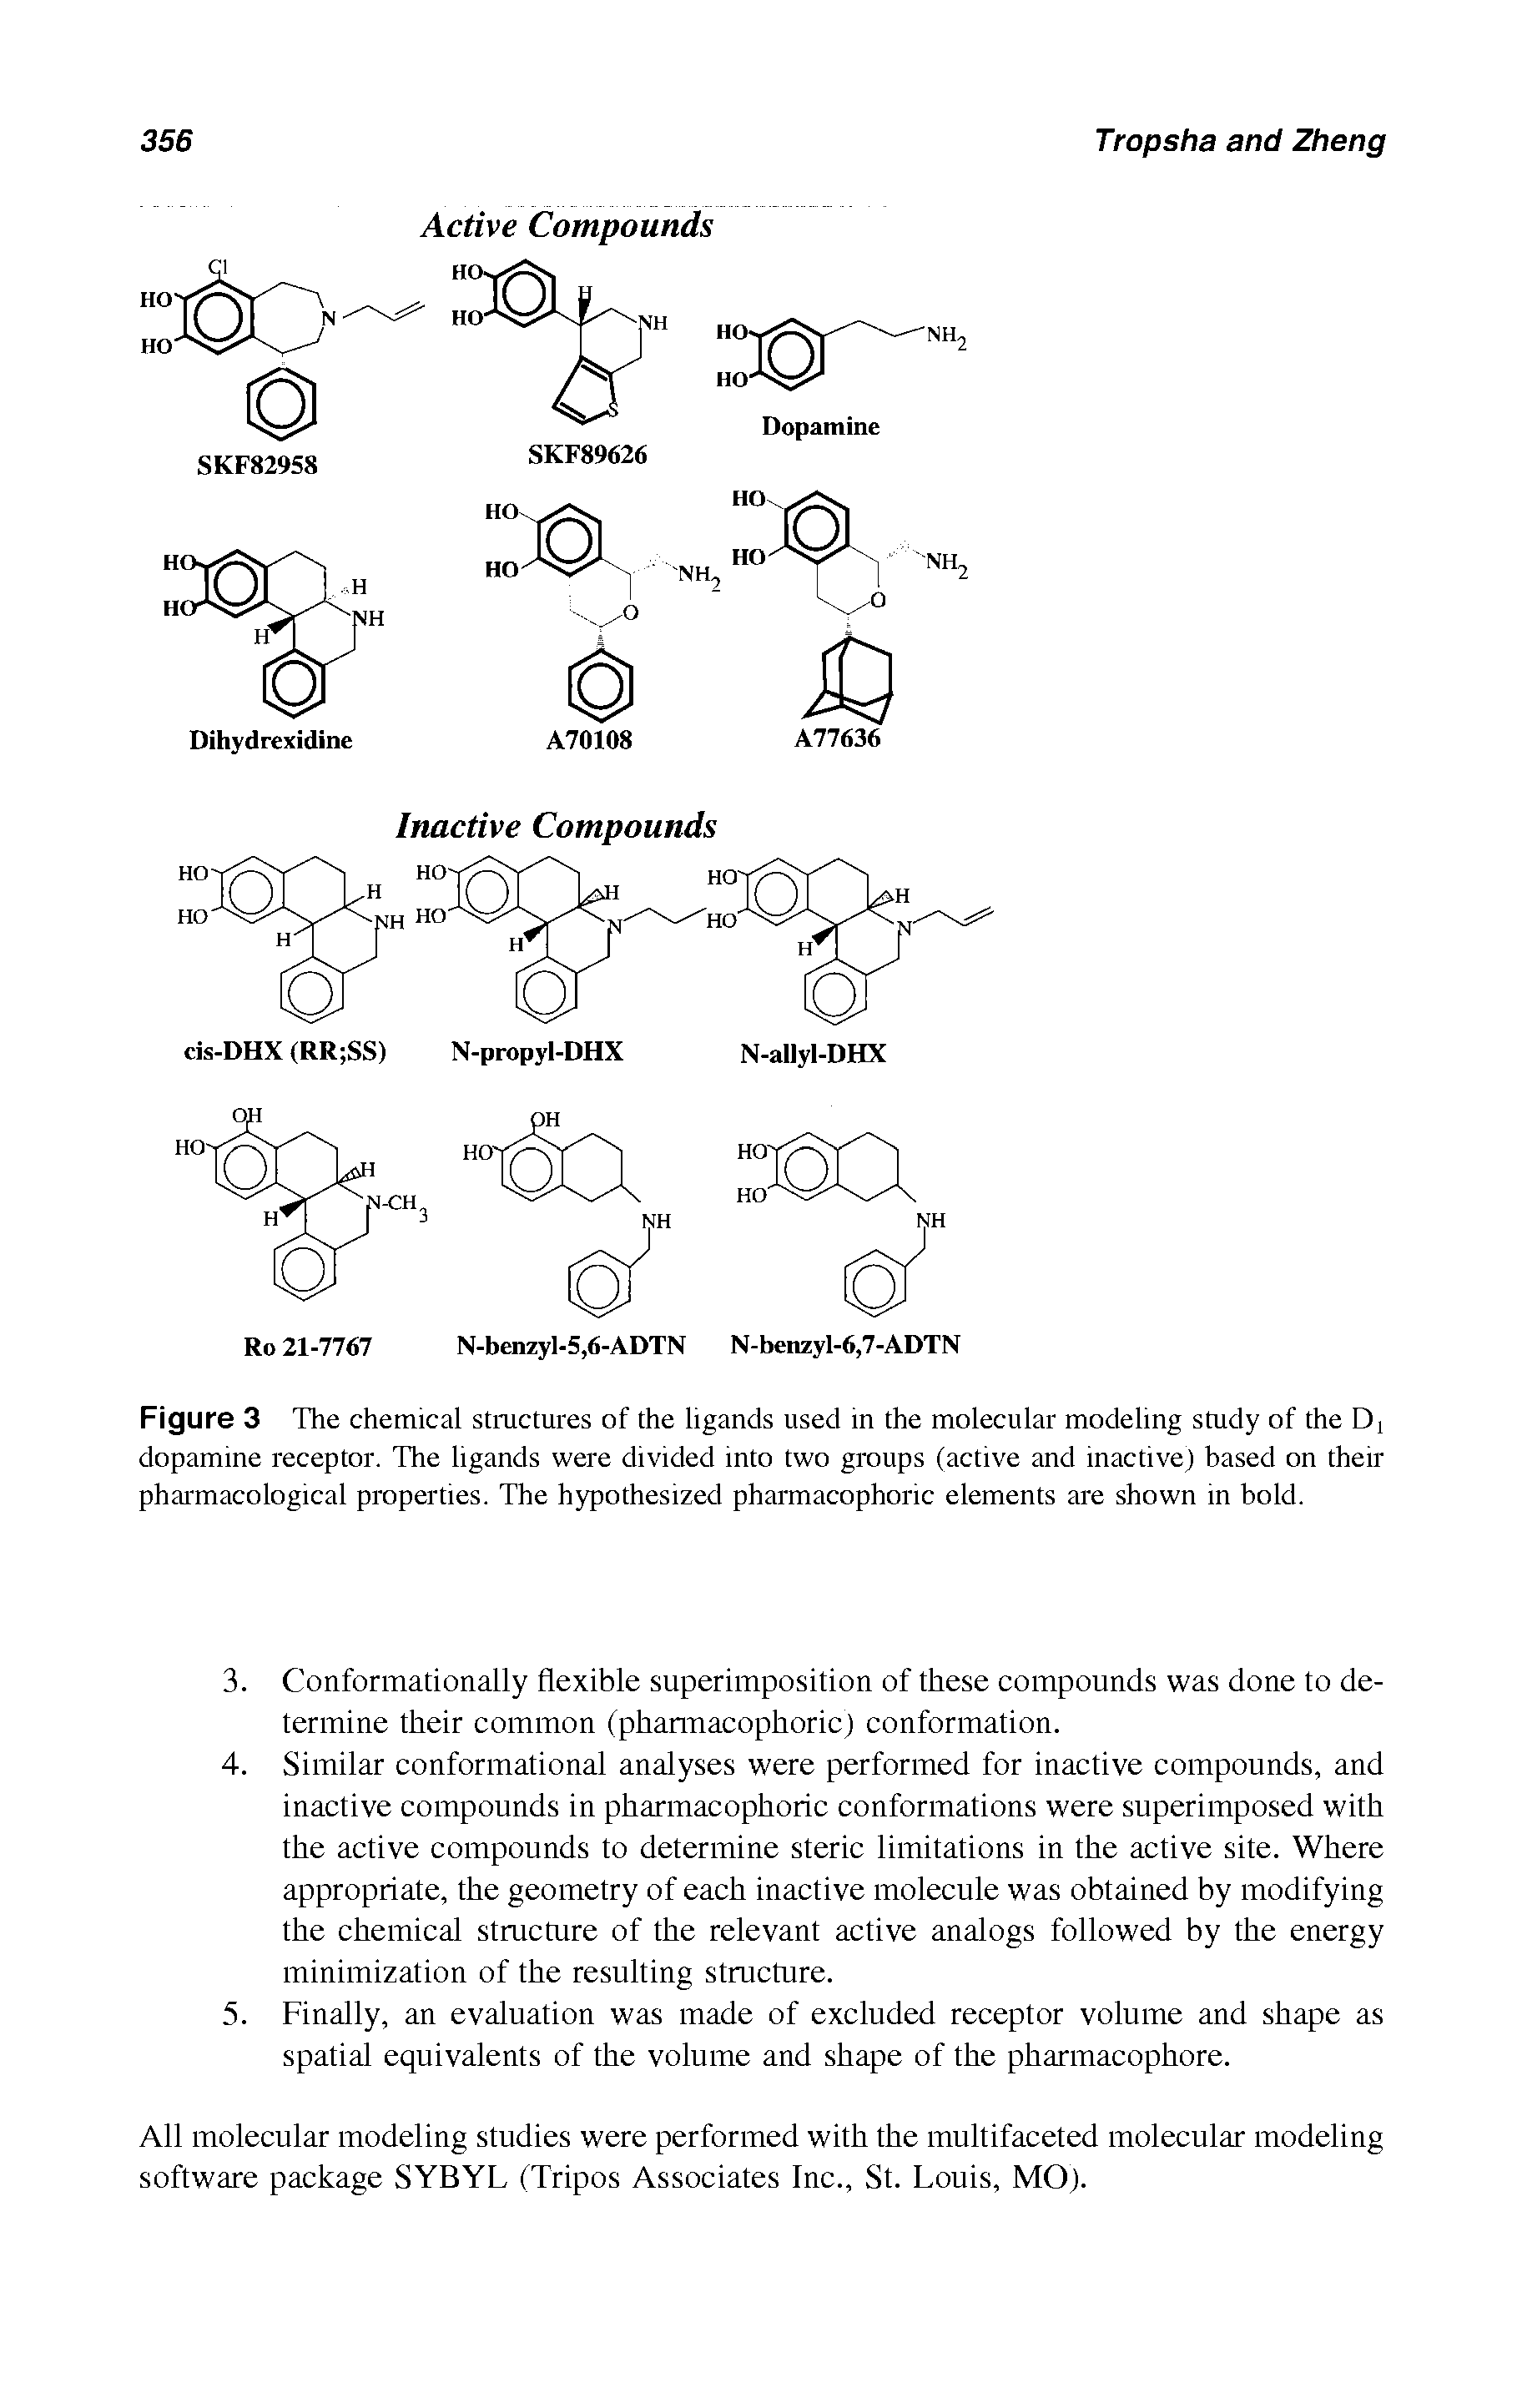 Figure 3 The chemical structures of the ligands used in the molecular modeling study of the Di dopamine receptor. The ligands were divided into two groups (active and inactive) based on their pharmacological properties. The hypothesized pharmacophoric elements are shown in bold.